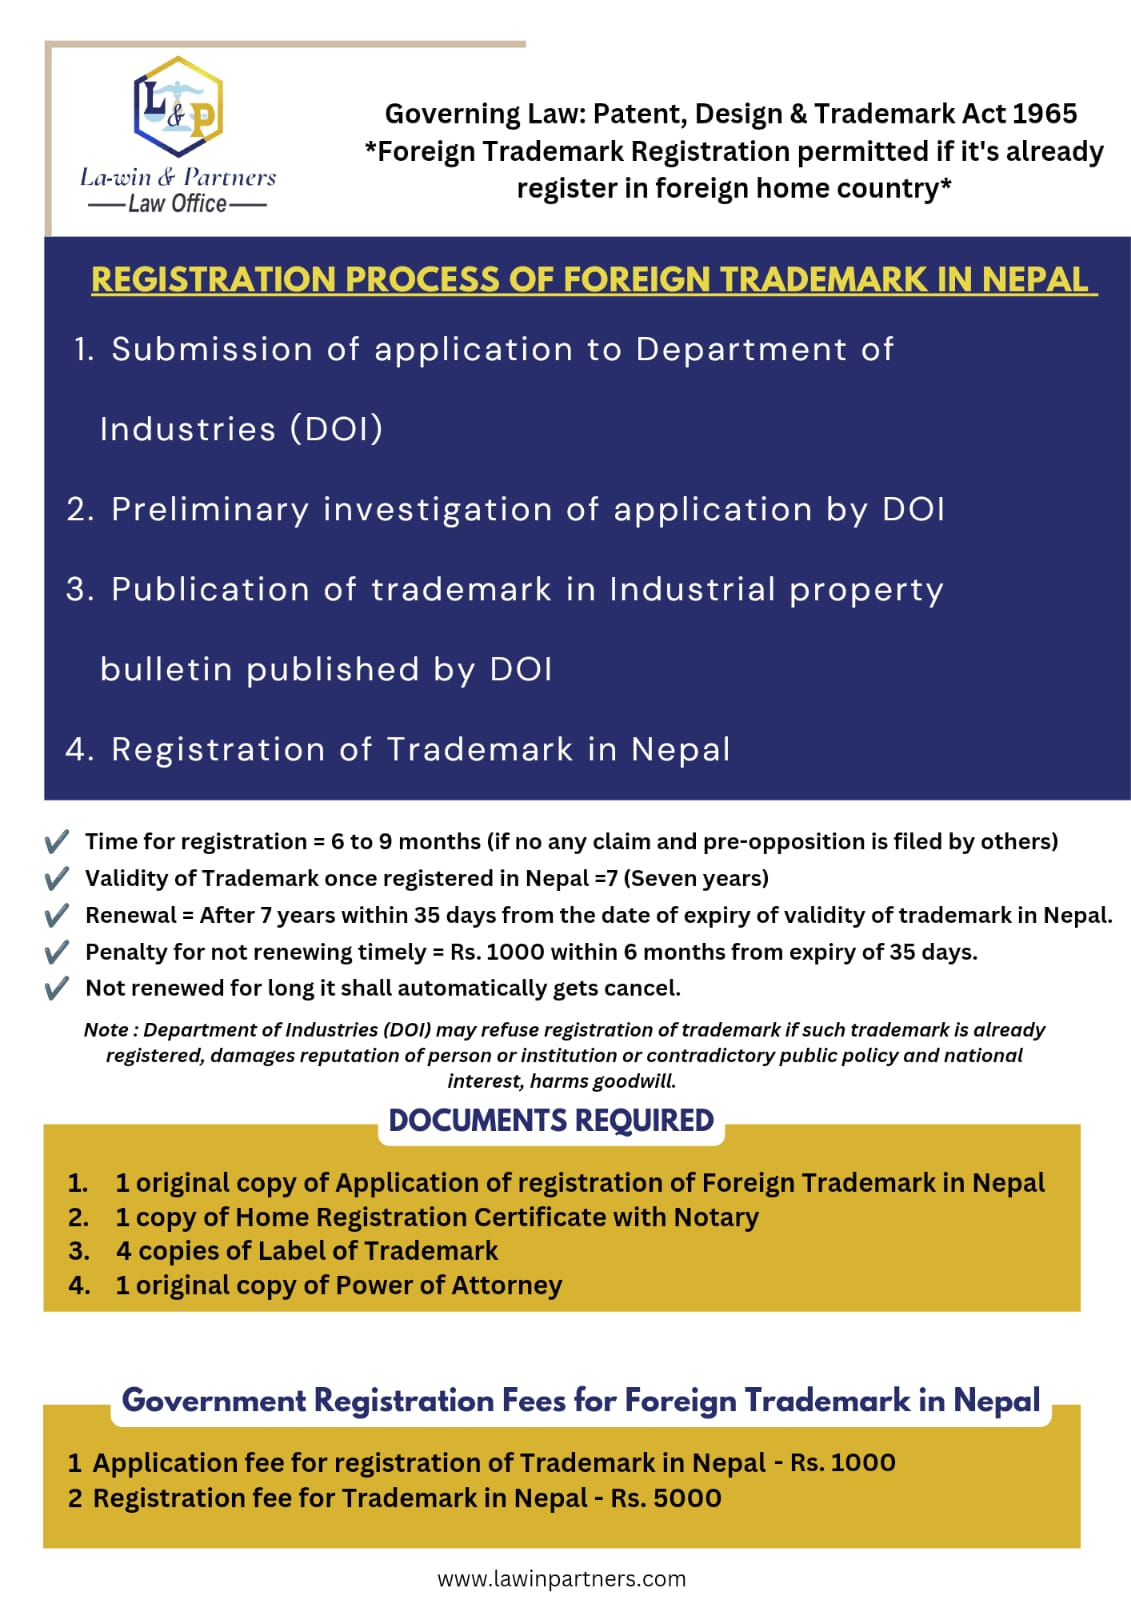 Process of Registration of Foreign Trademark in Nepal